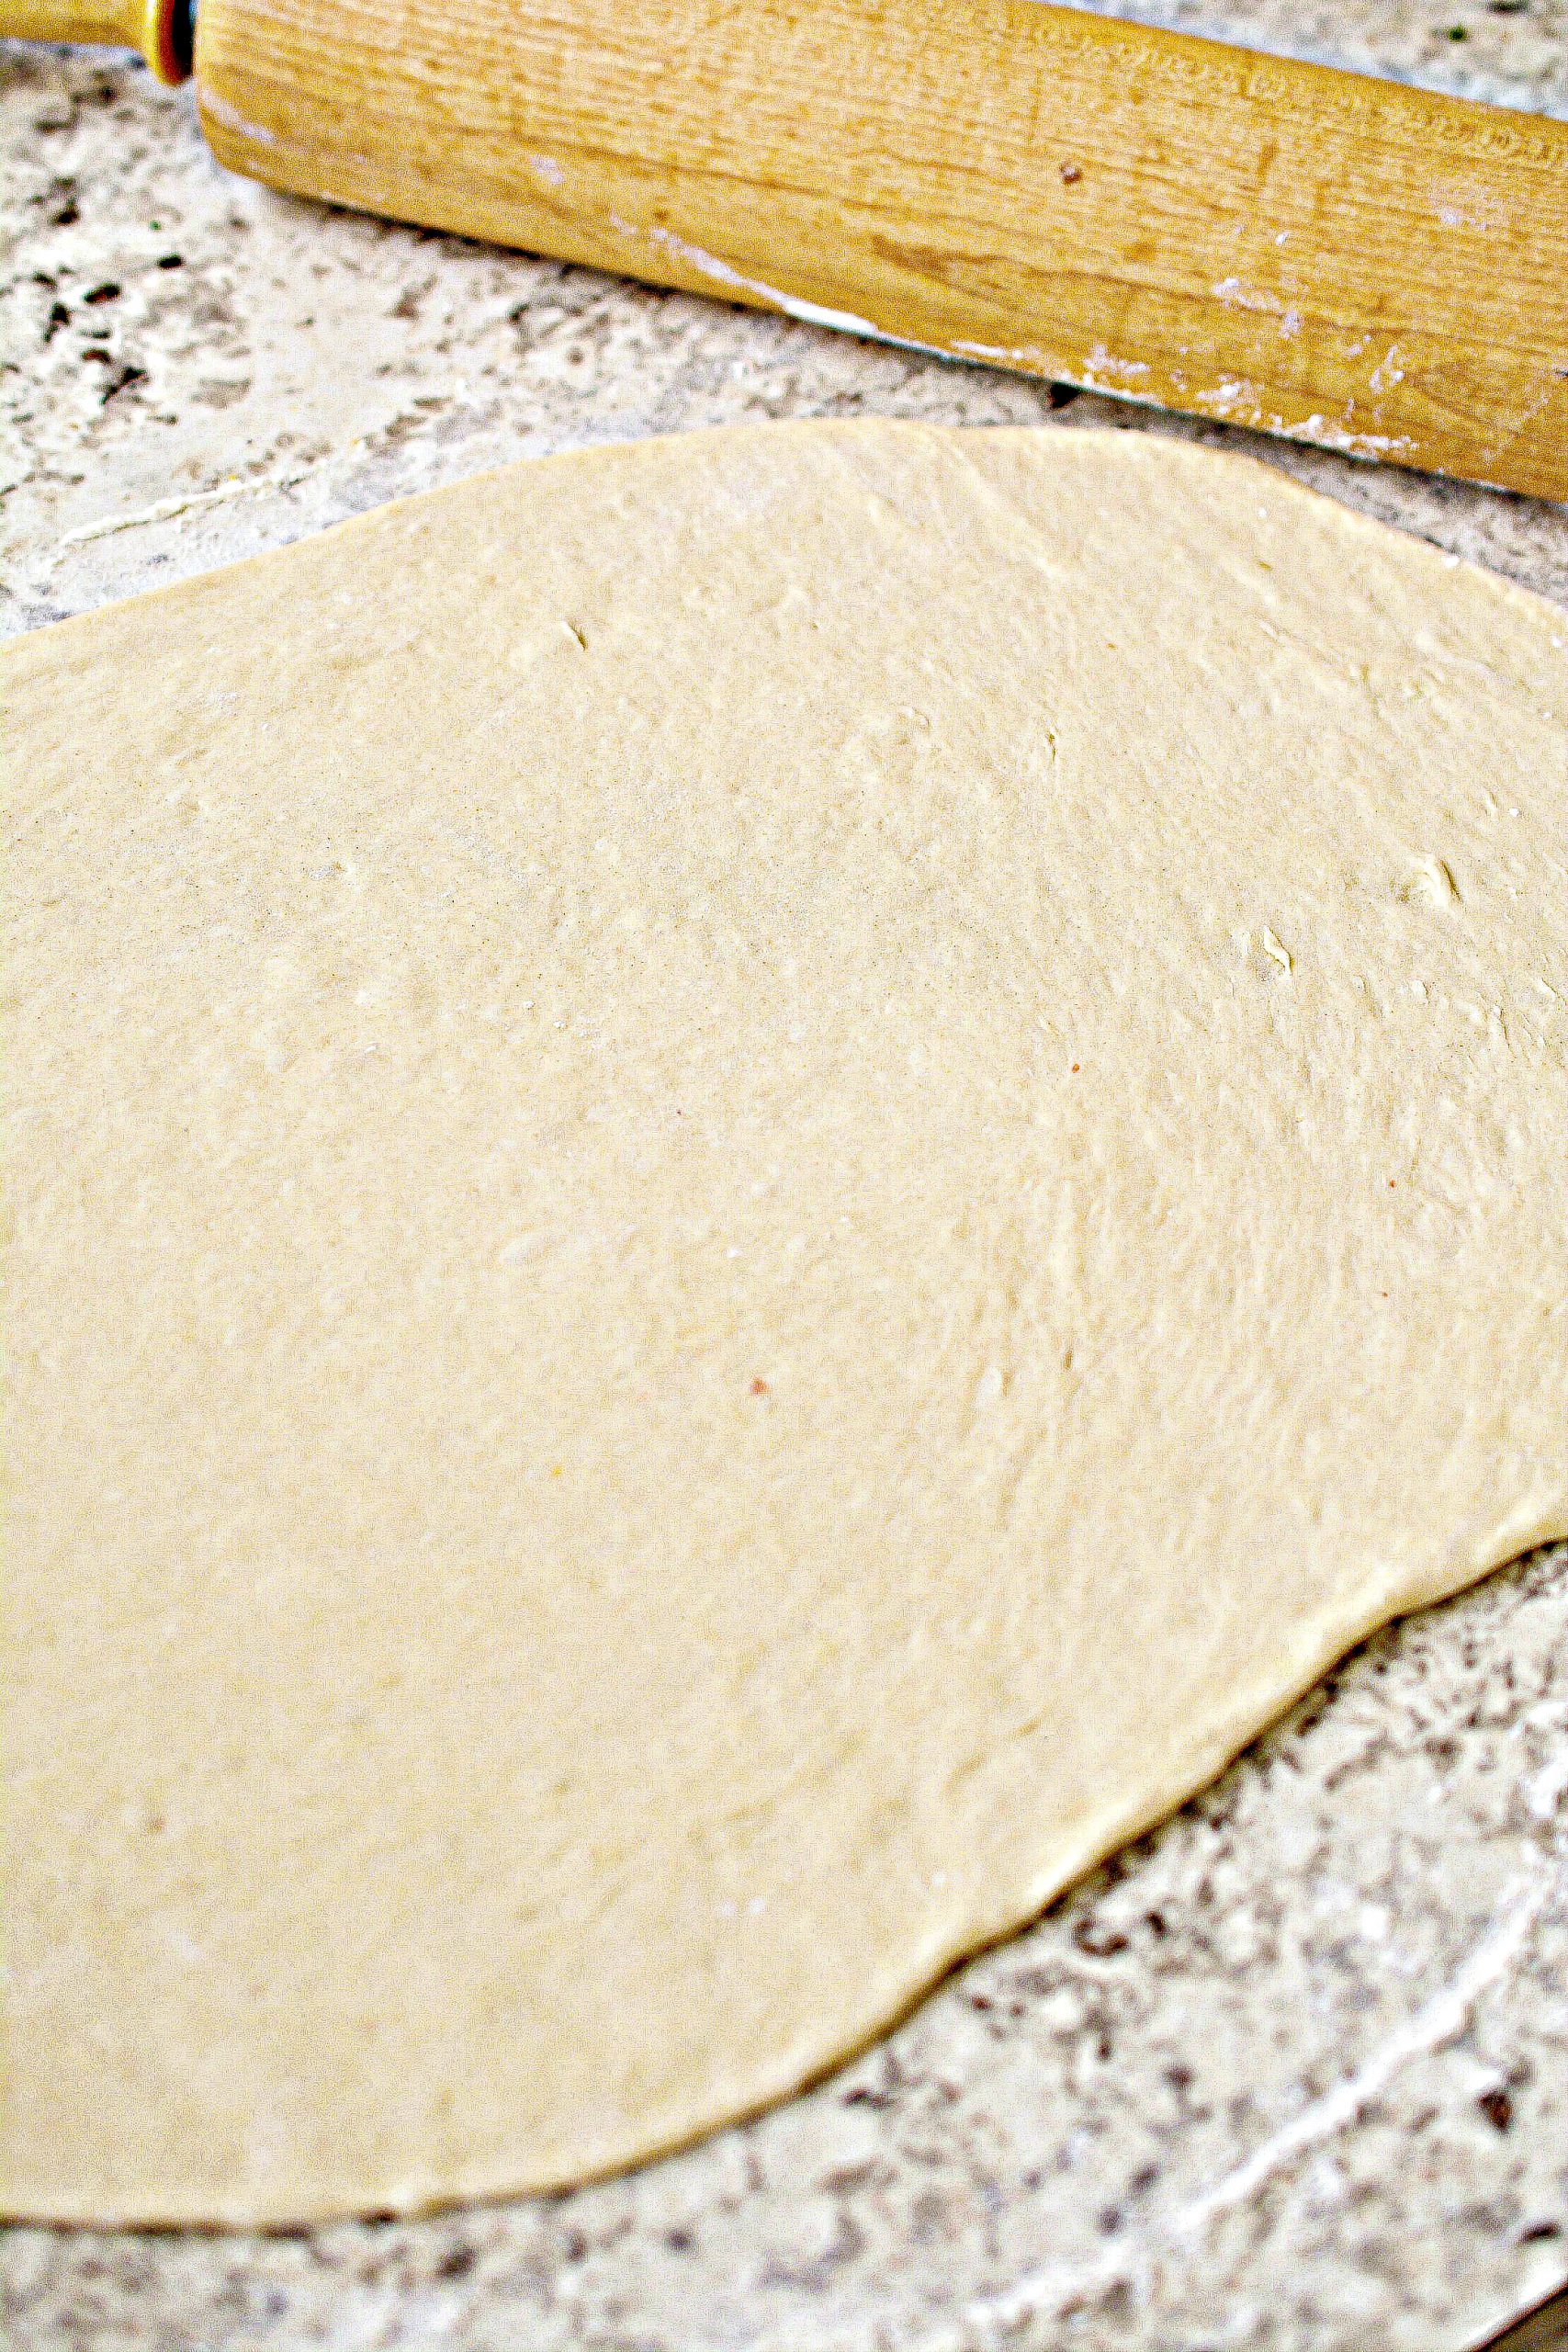 Roll the dough out onto a floured surface into a rectangular shape about ¼ of an inch thick or less.